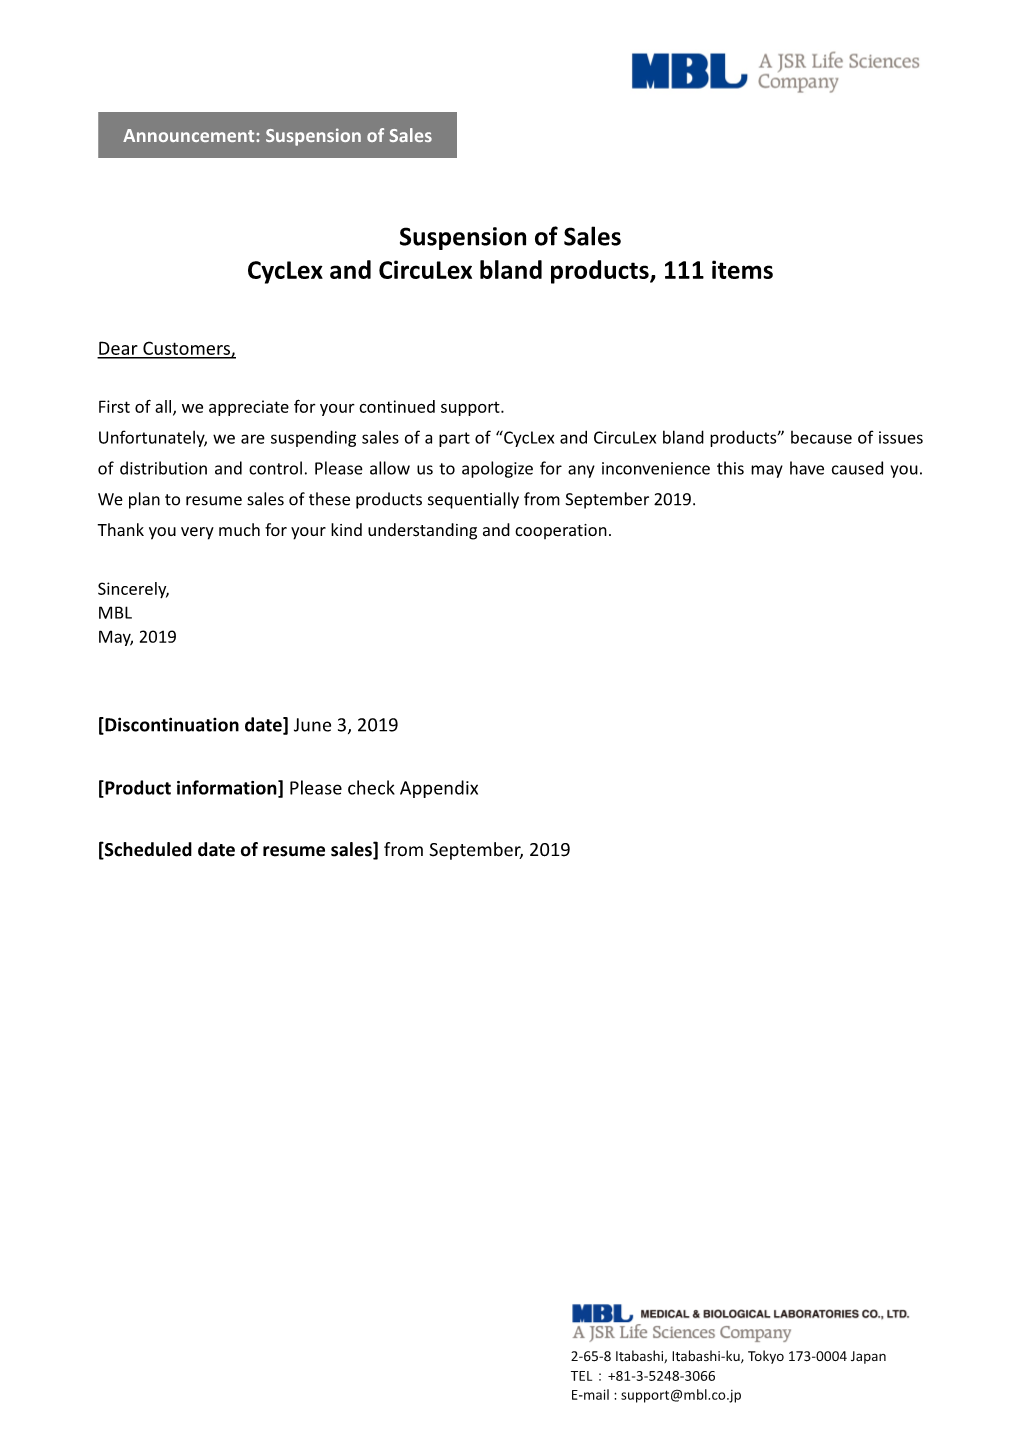 Suspension of Sales Cyclex and Circulex Bland Products, 111 Items